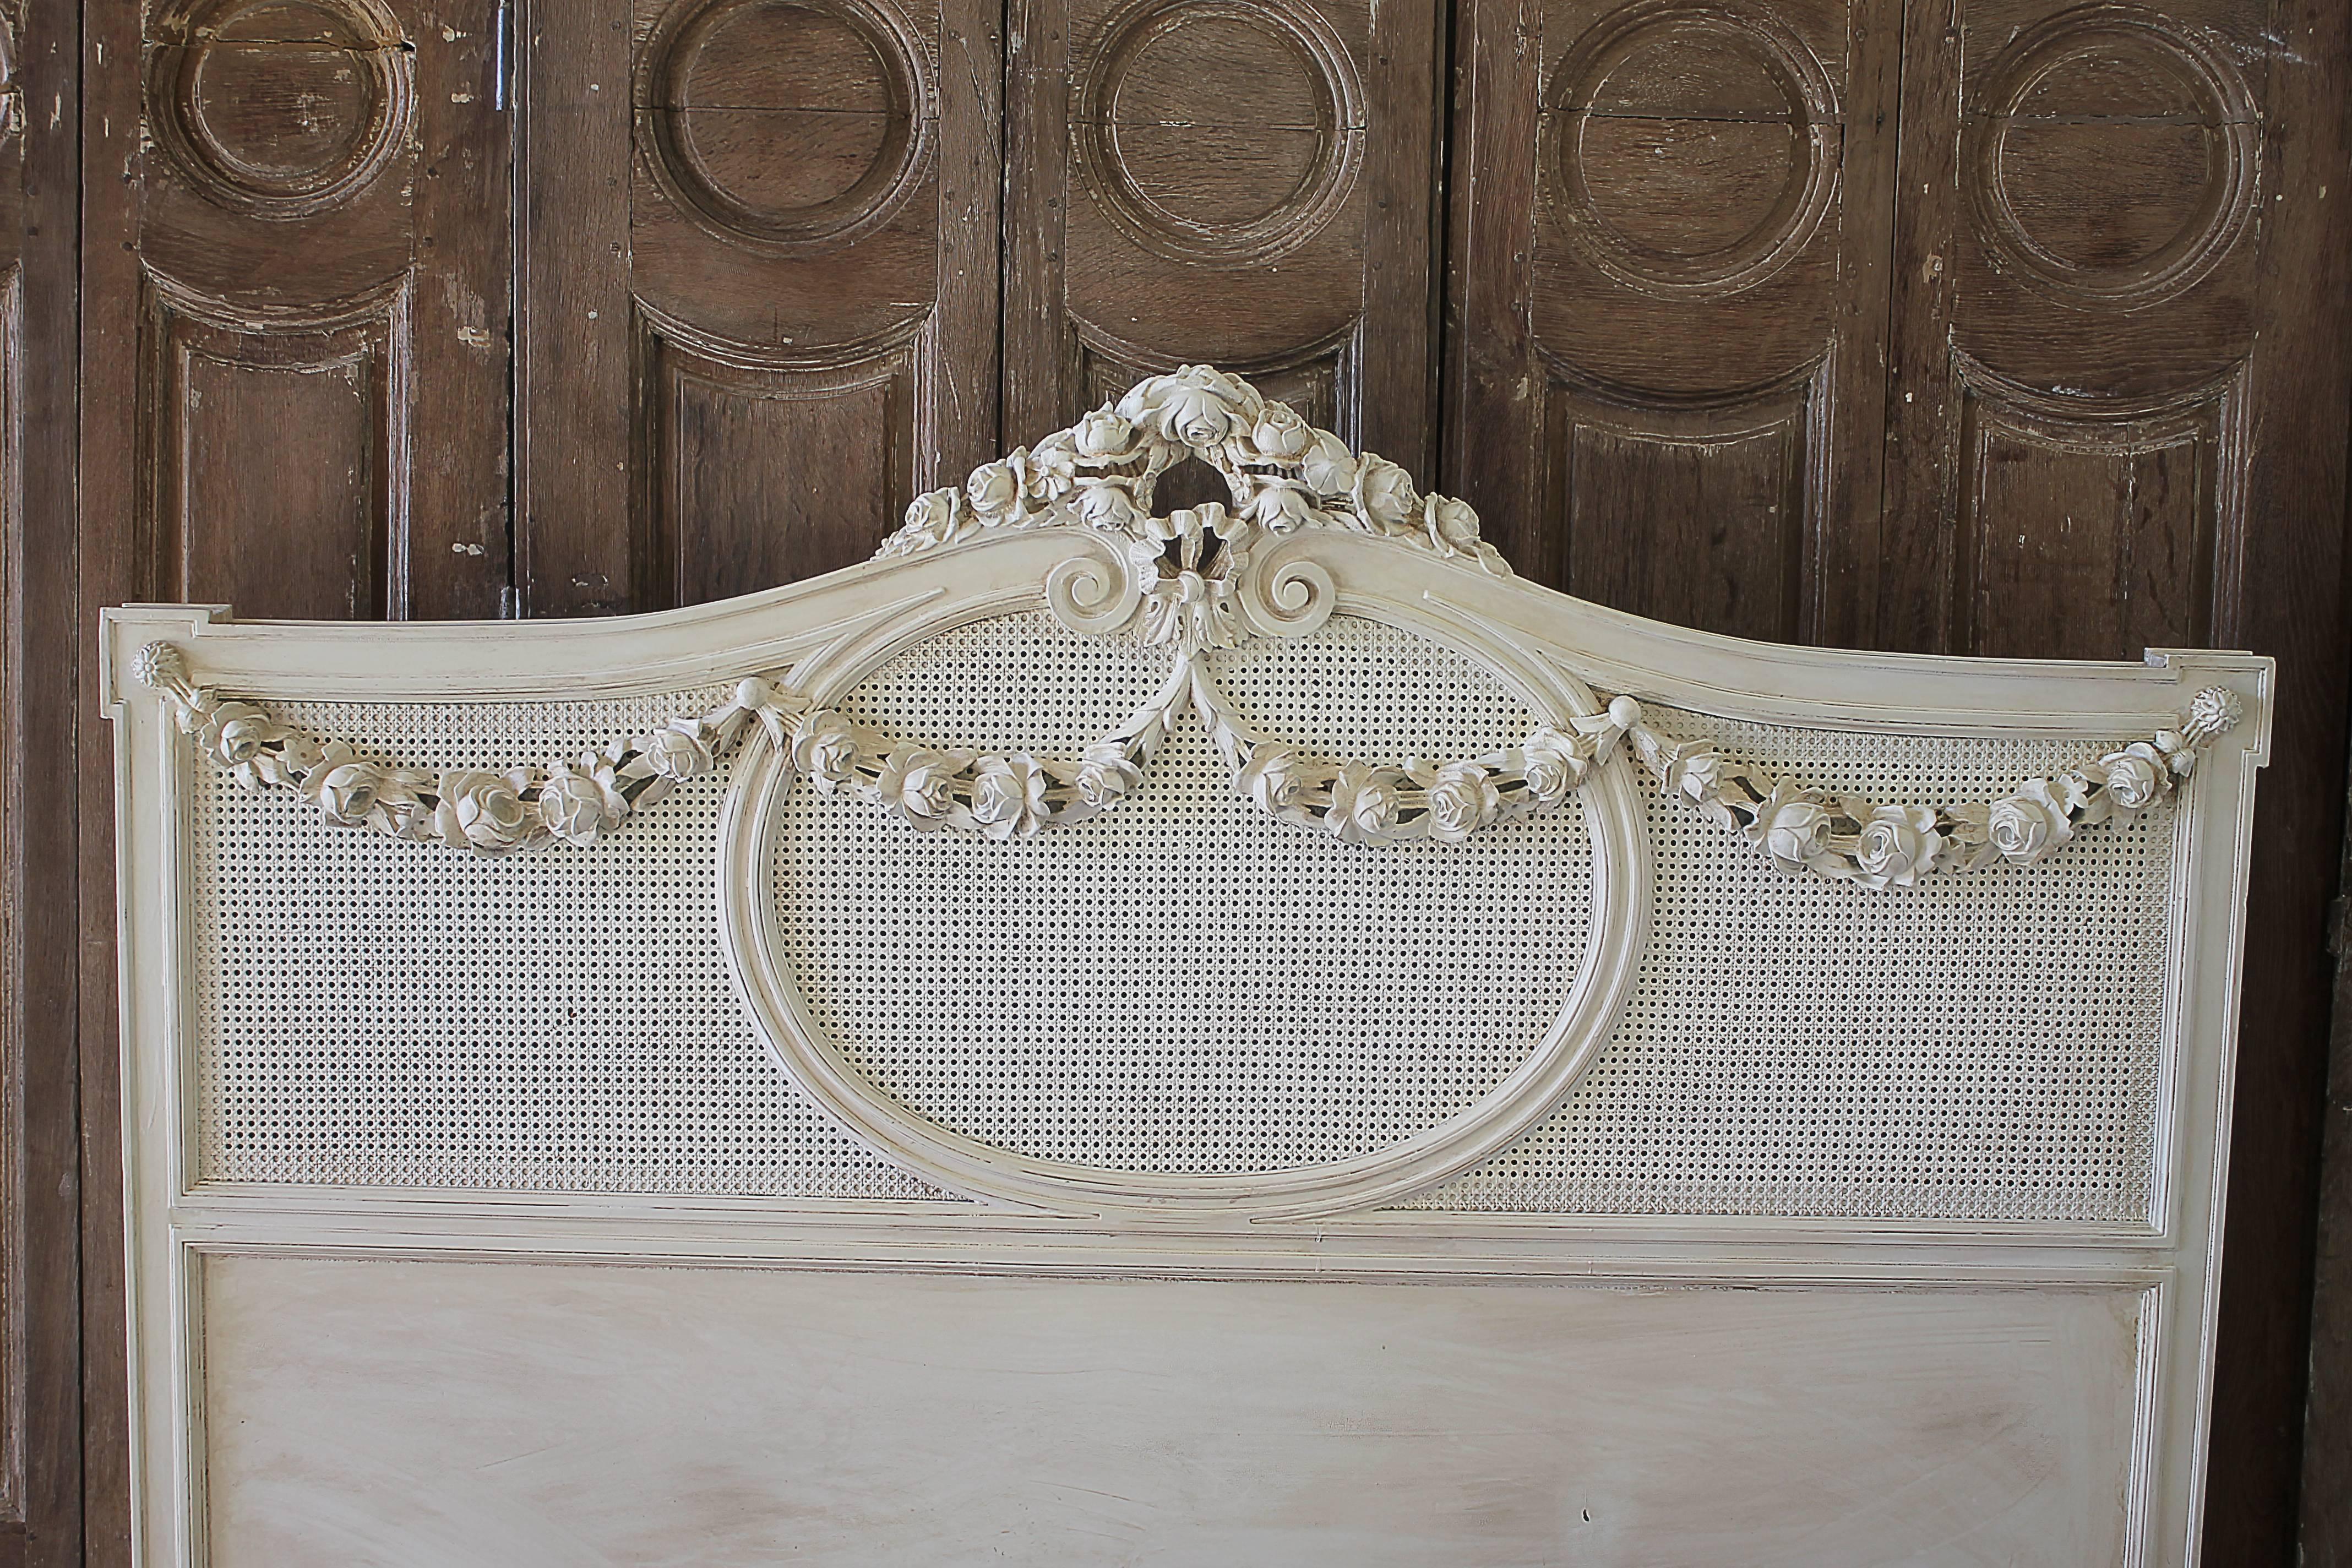 French Country Painted Cane and Roses Swag Bed Full or Queen
Beautiful bed painted in a creamy white color, with petite cane headboard and footboard, large garlands of roses swag down over the cane.  This bed has original rails to fit a standard